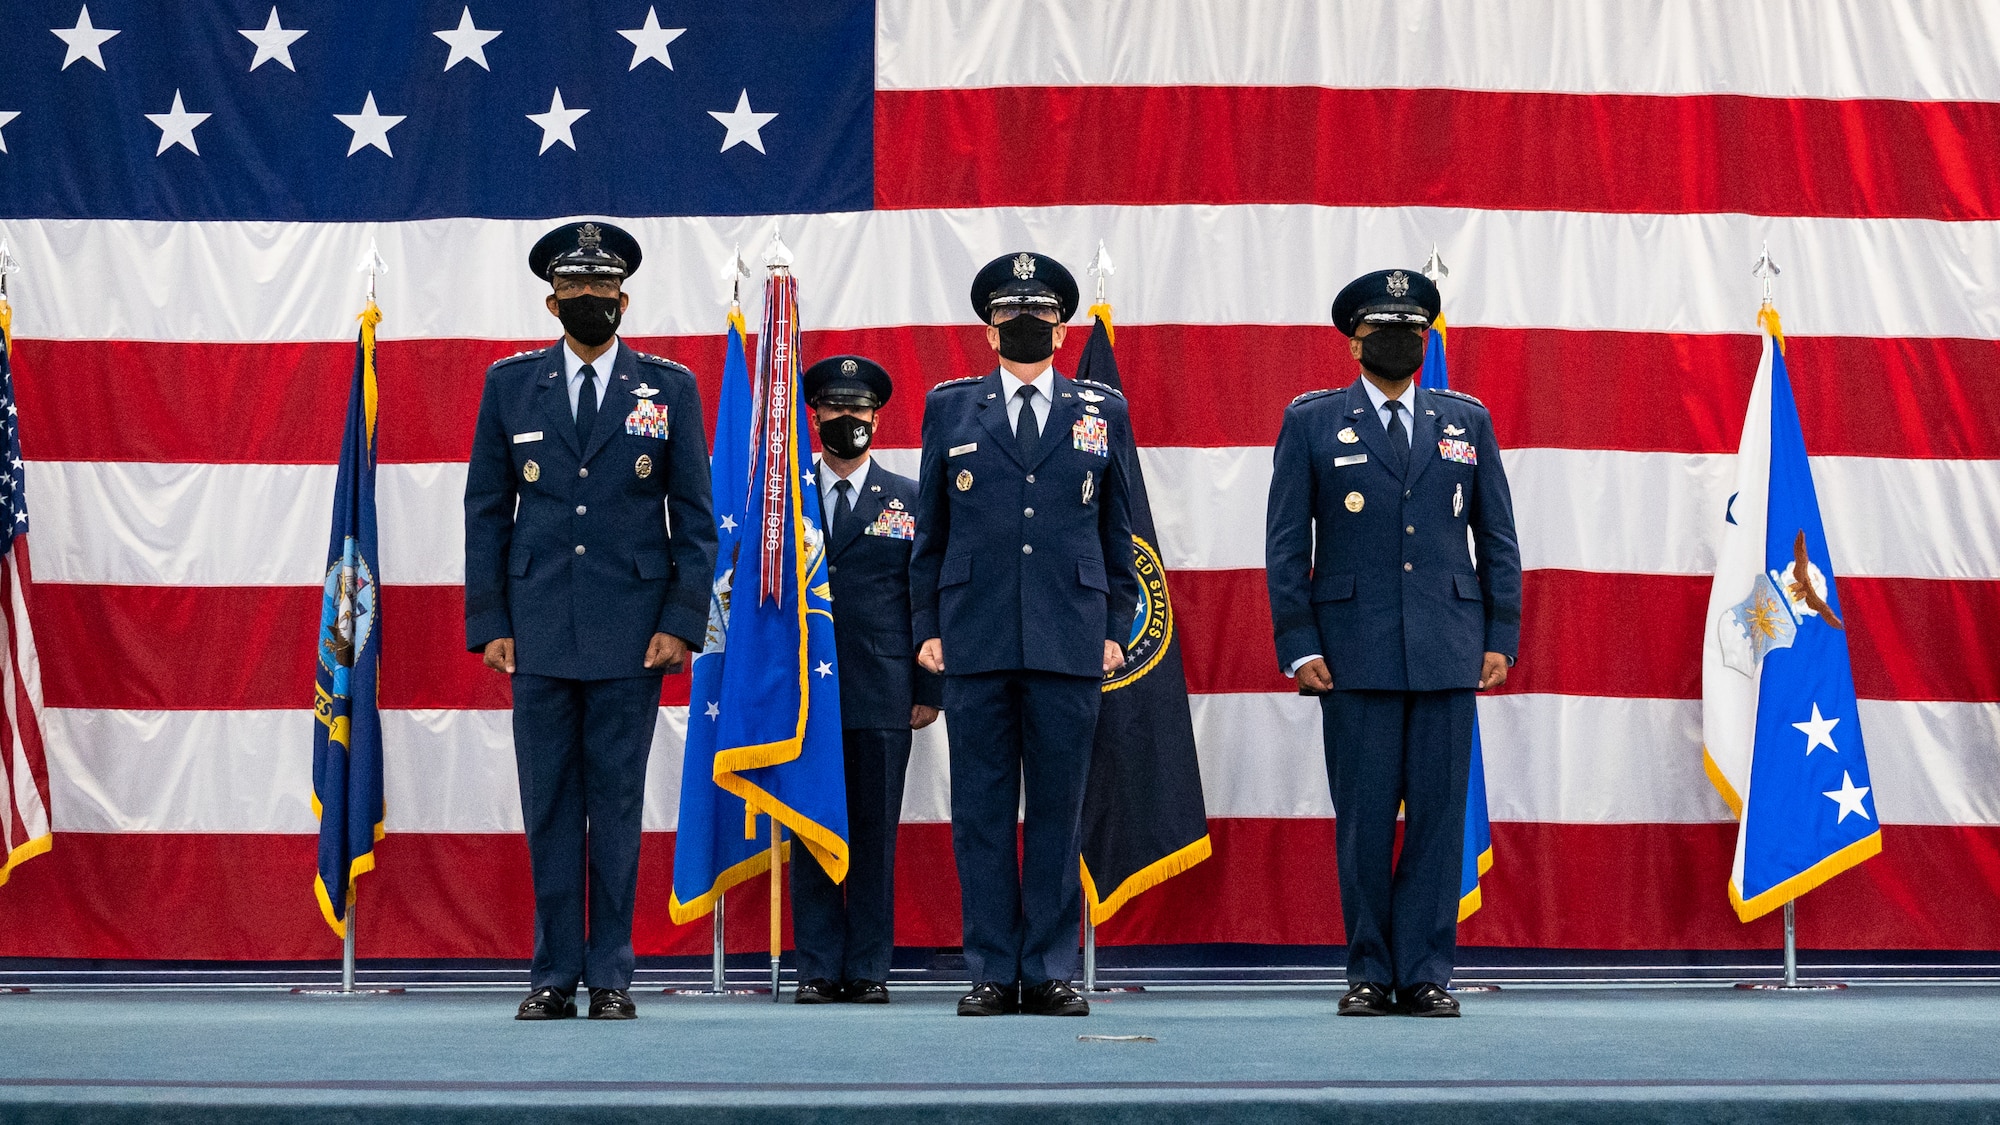 Air Force Chief of Staff Gen. CQ Brown, Jr., Gen. Timothy Ray, outgoing Air Force Global Strike Command commander, and Gen. Anthony Cotton, incoming AFGSC commander, stand at the position of attention during the AFGSC change of command ceremony at Barksdale Air Force Base, Louisiana, Aug. 27, 2021. The ceremony is a military tradition that represents a formal transfer of authority and responsibility for a unit from one commanding or flag officer to another. (U.S. Air Force photo by Senior Airman Jacob B. Wrightsman)